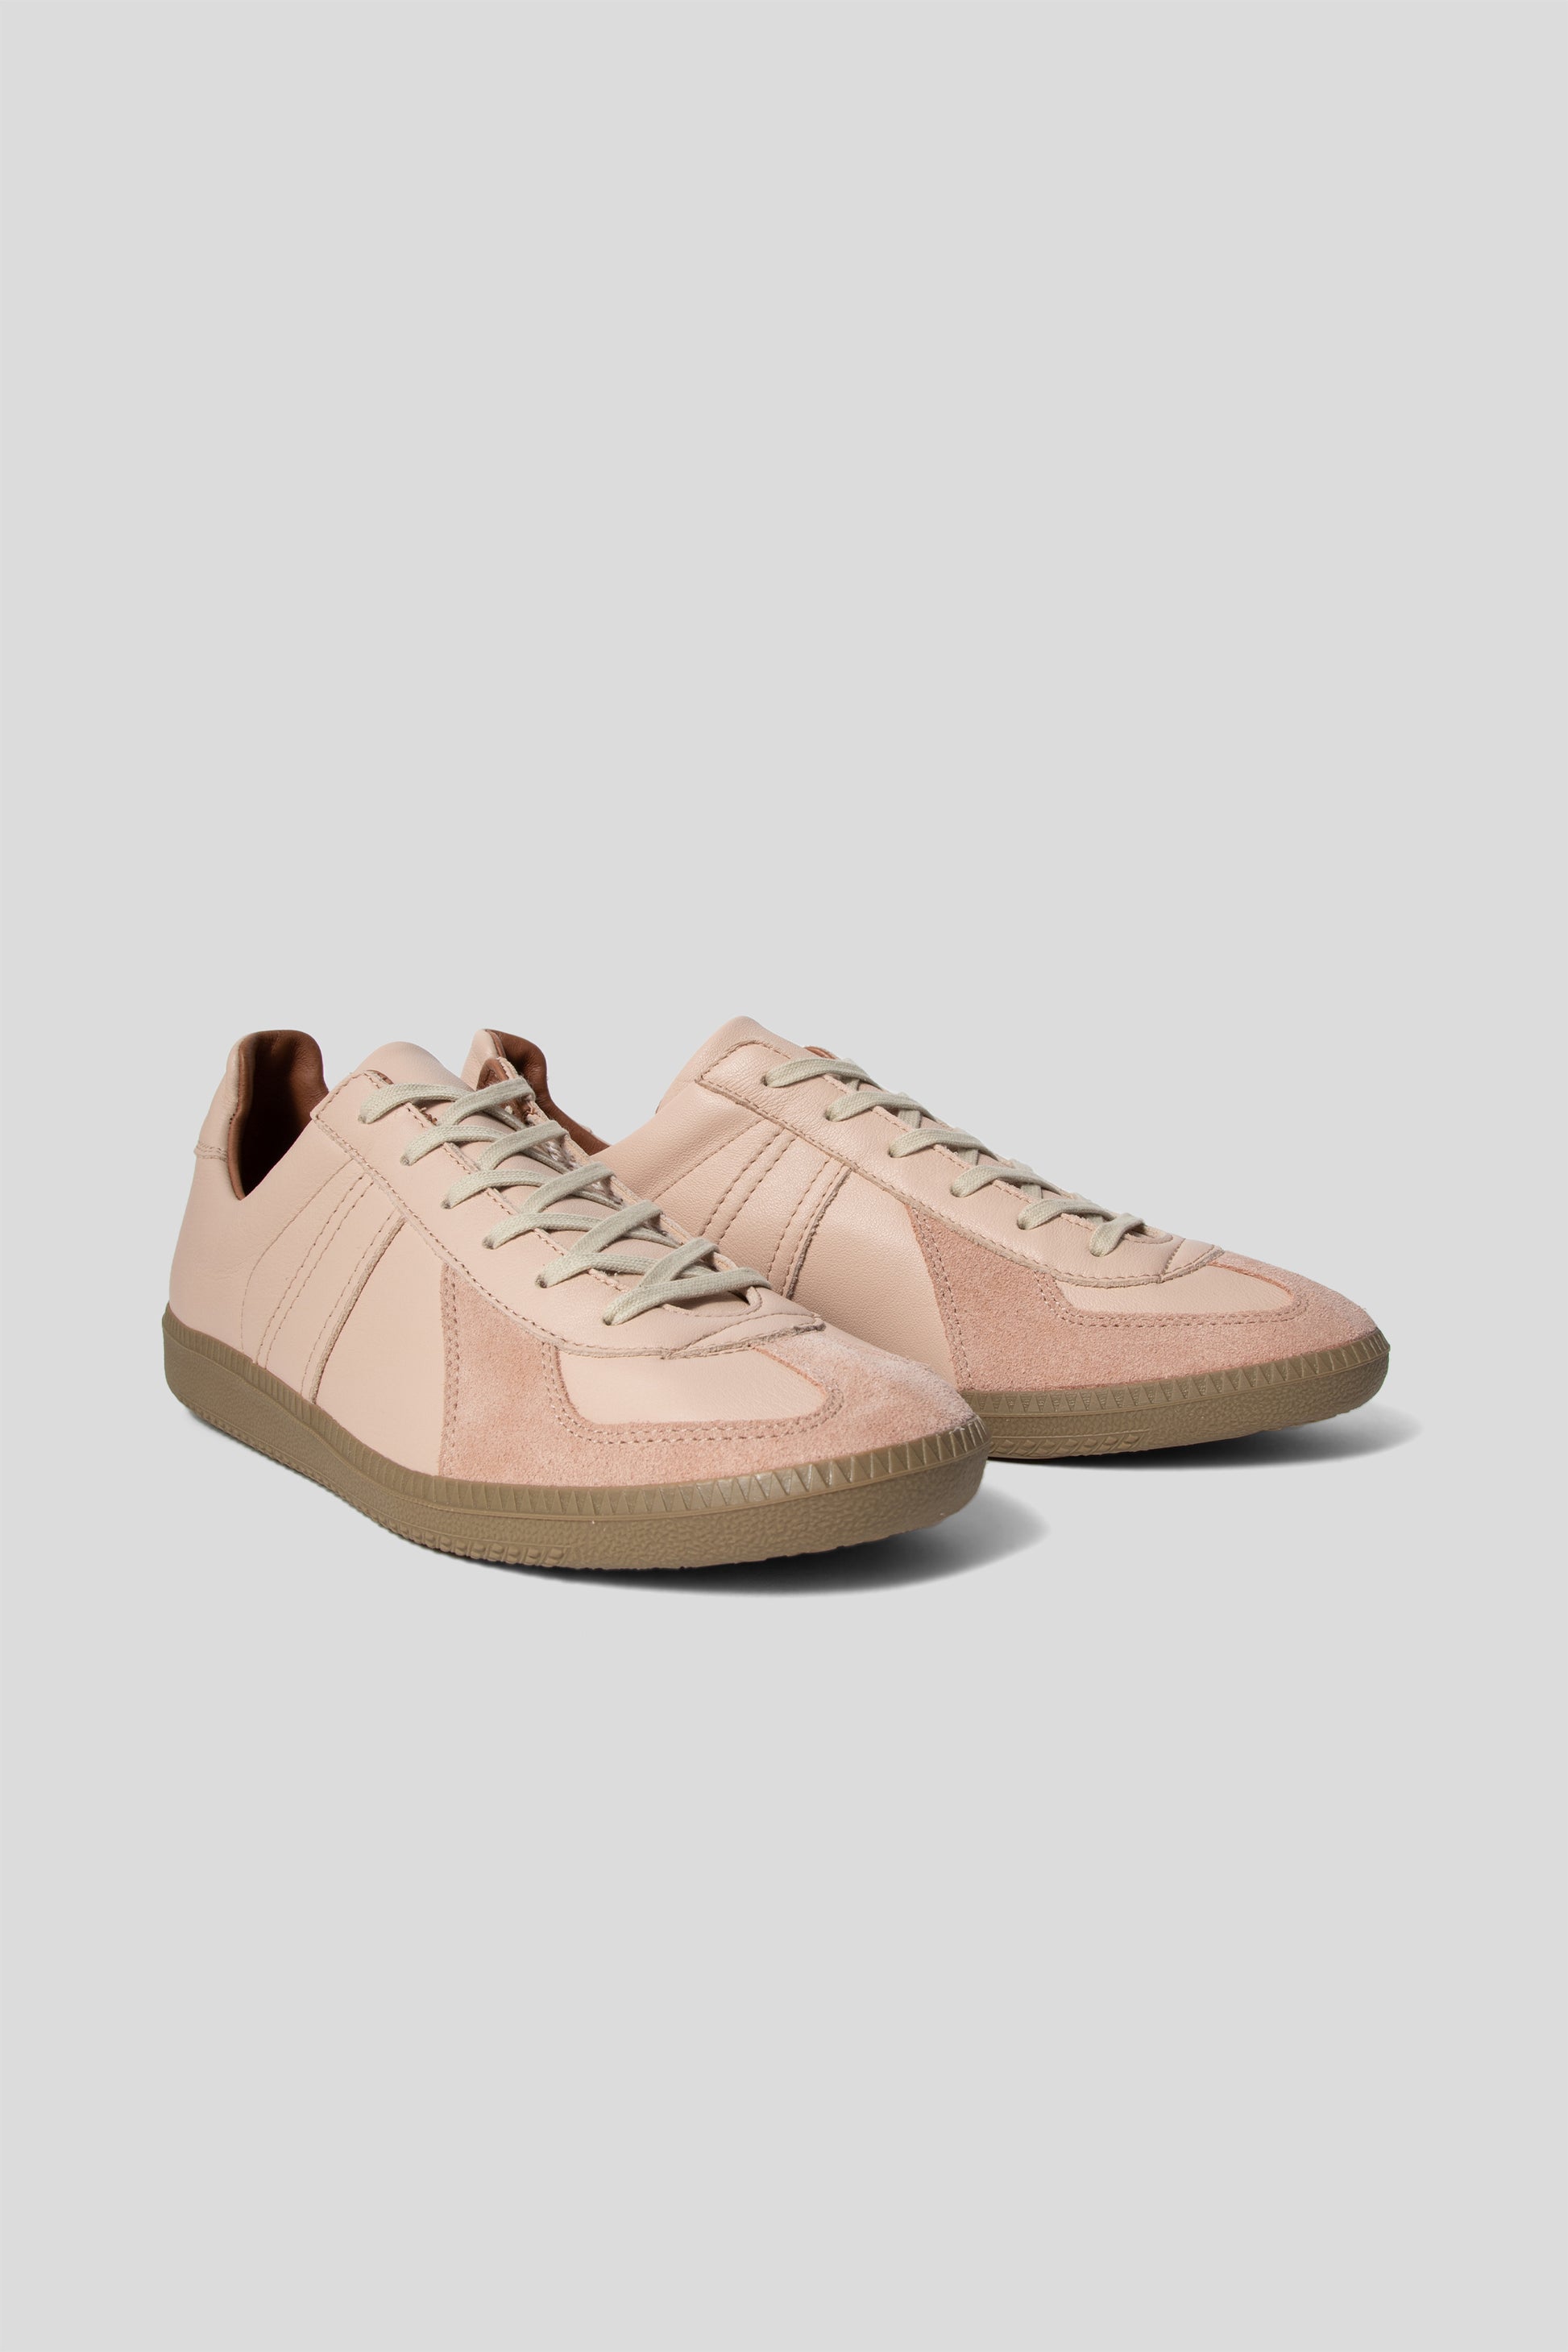 Reproduction of Found WMNS German Military Trainer Shoe in Nude